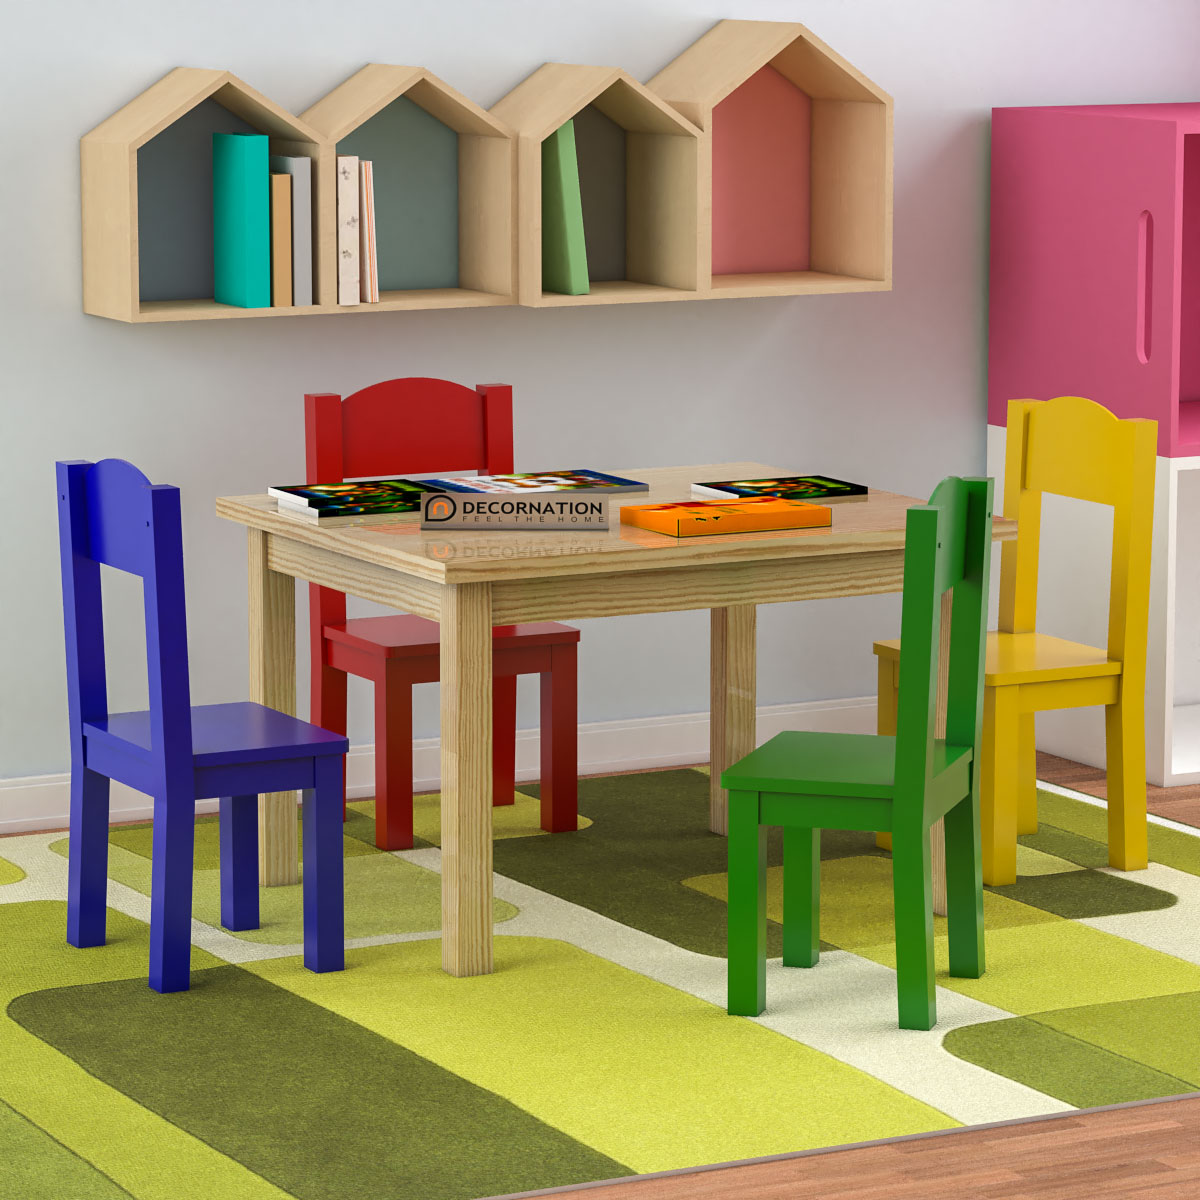 Judith Solid Wood Table & Chairs Kids Furniture   Decornation